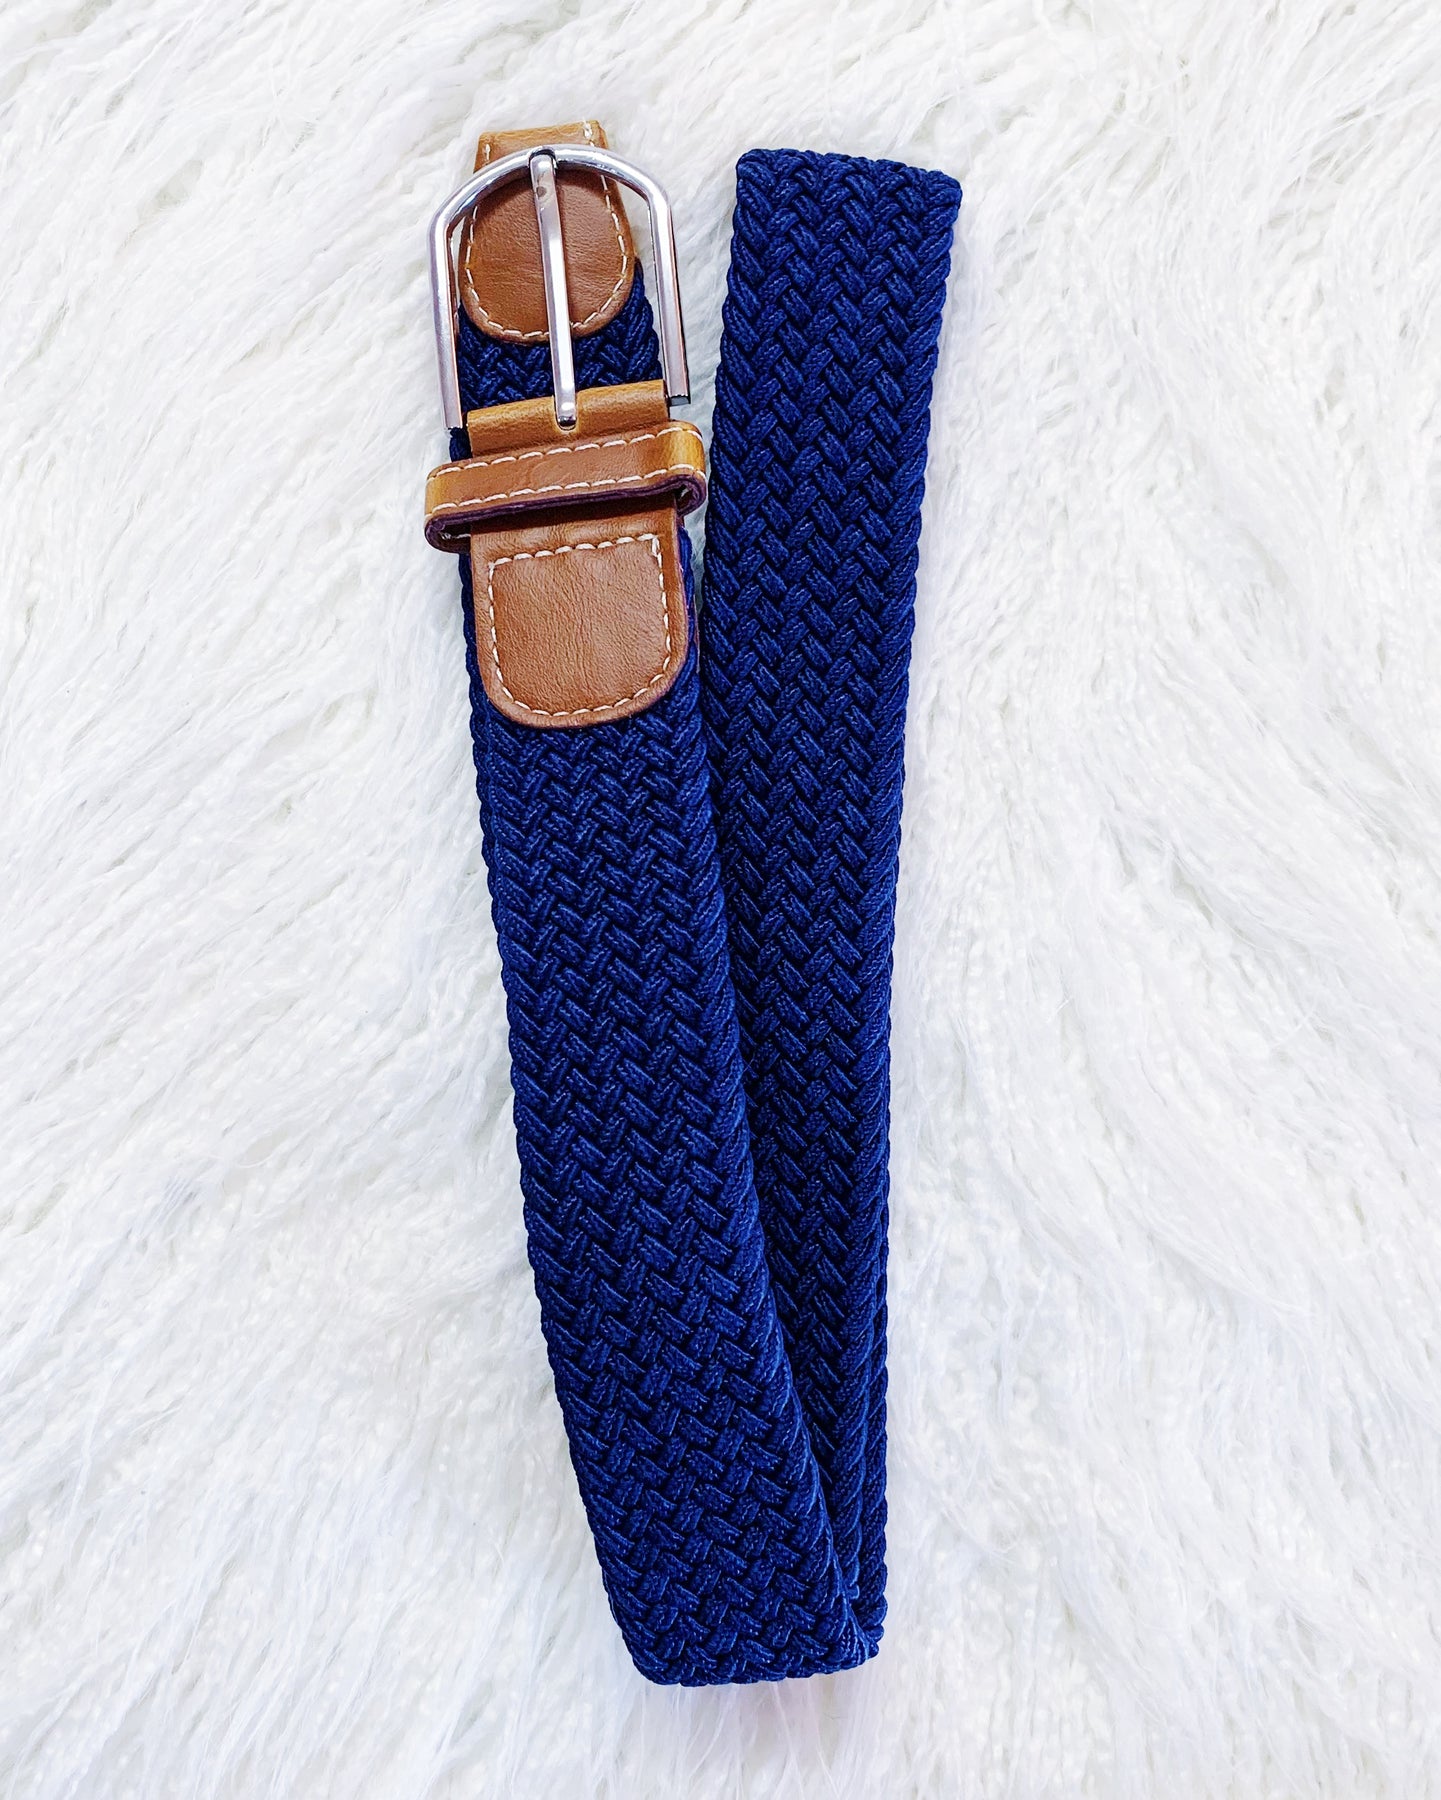 Urban Horsewear Stretch Belts - For Riders